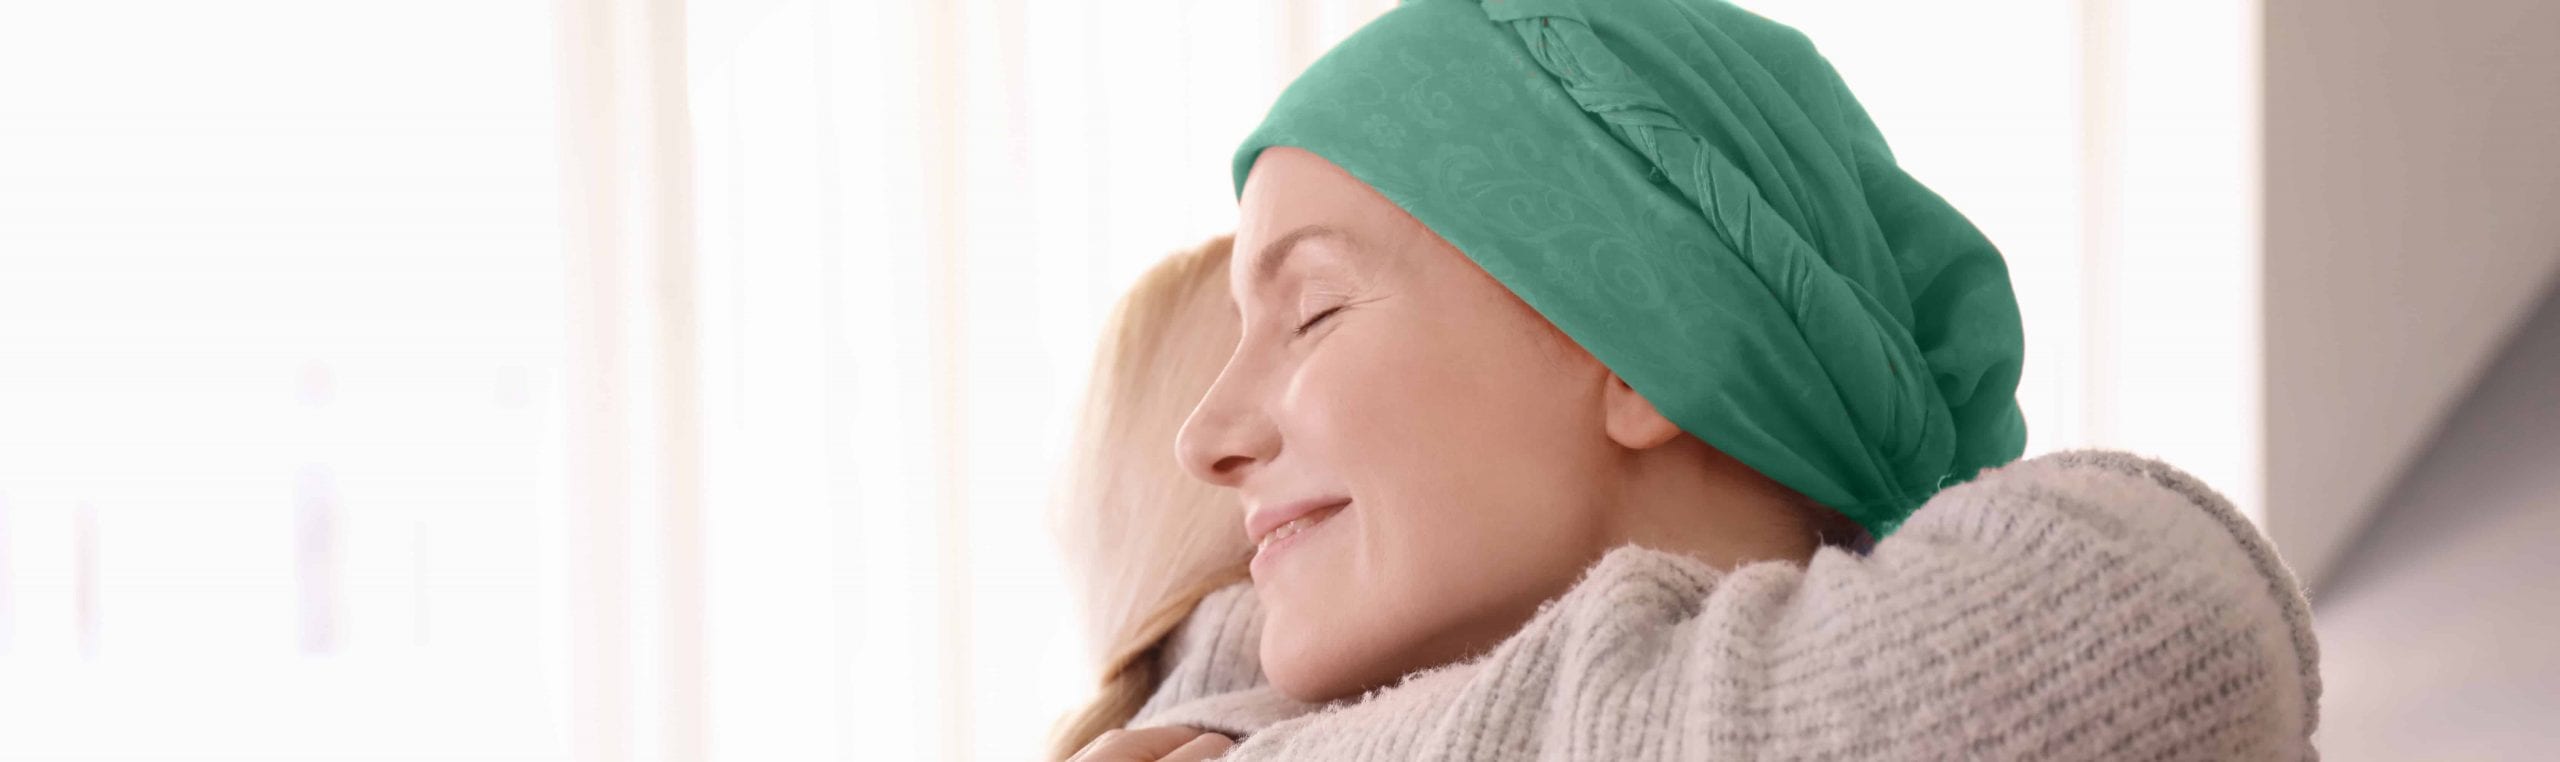 Woman with cancer and green bandanna hugging friend